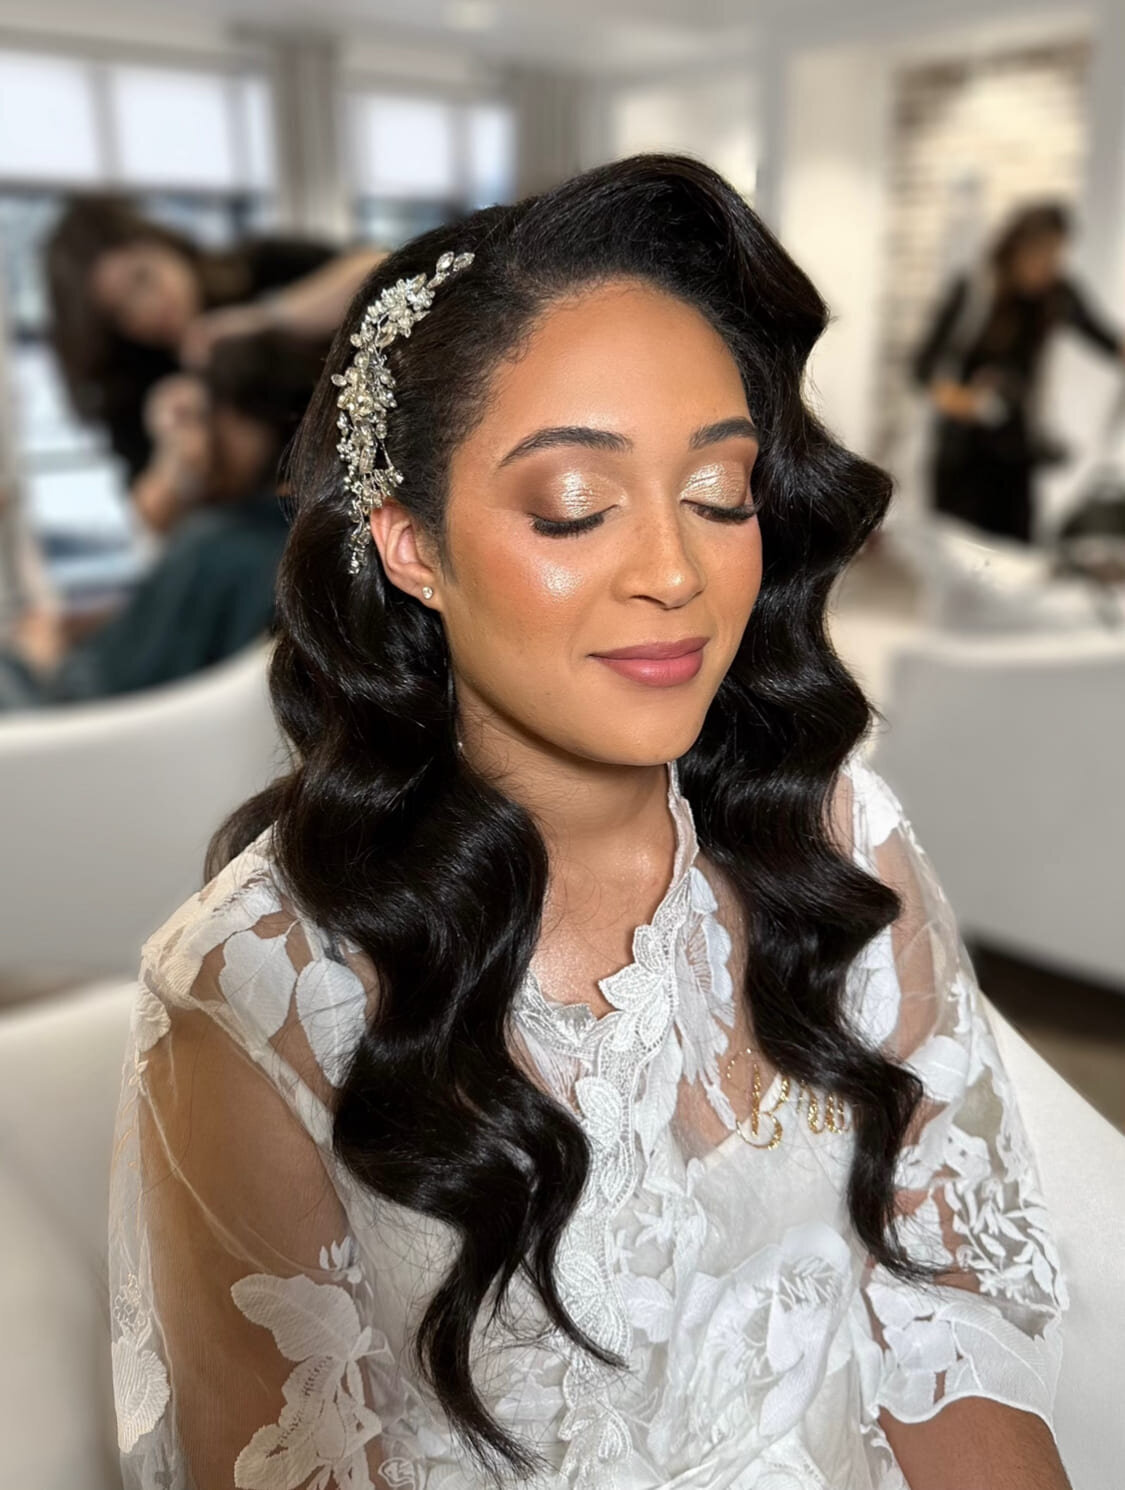 Lilly Bridal Artistry - Wedding Hair and Makeup Artists - Behind the Scenes 10